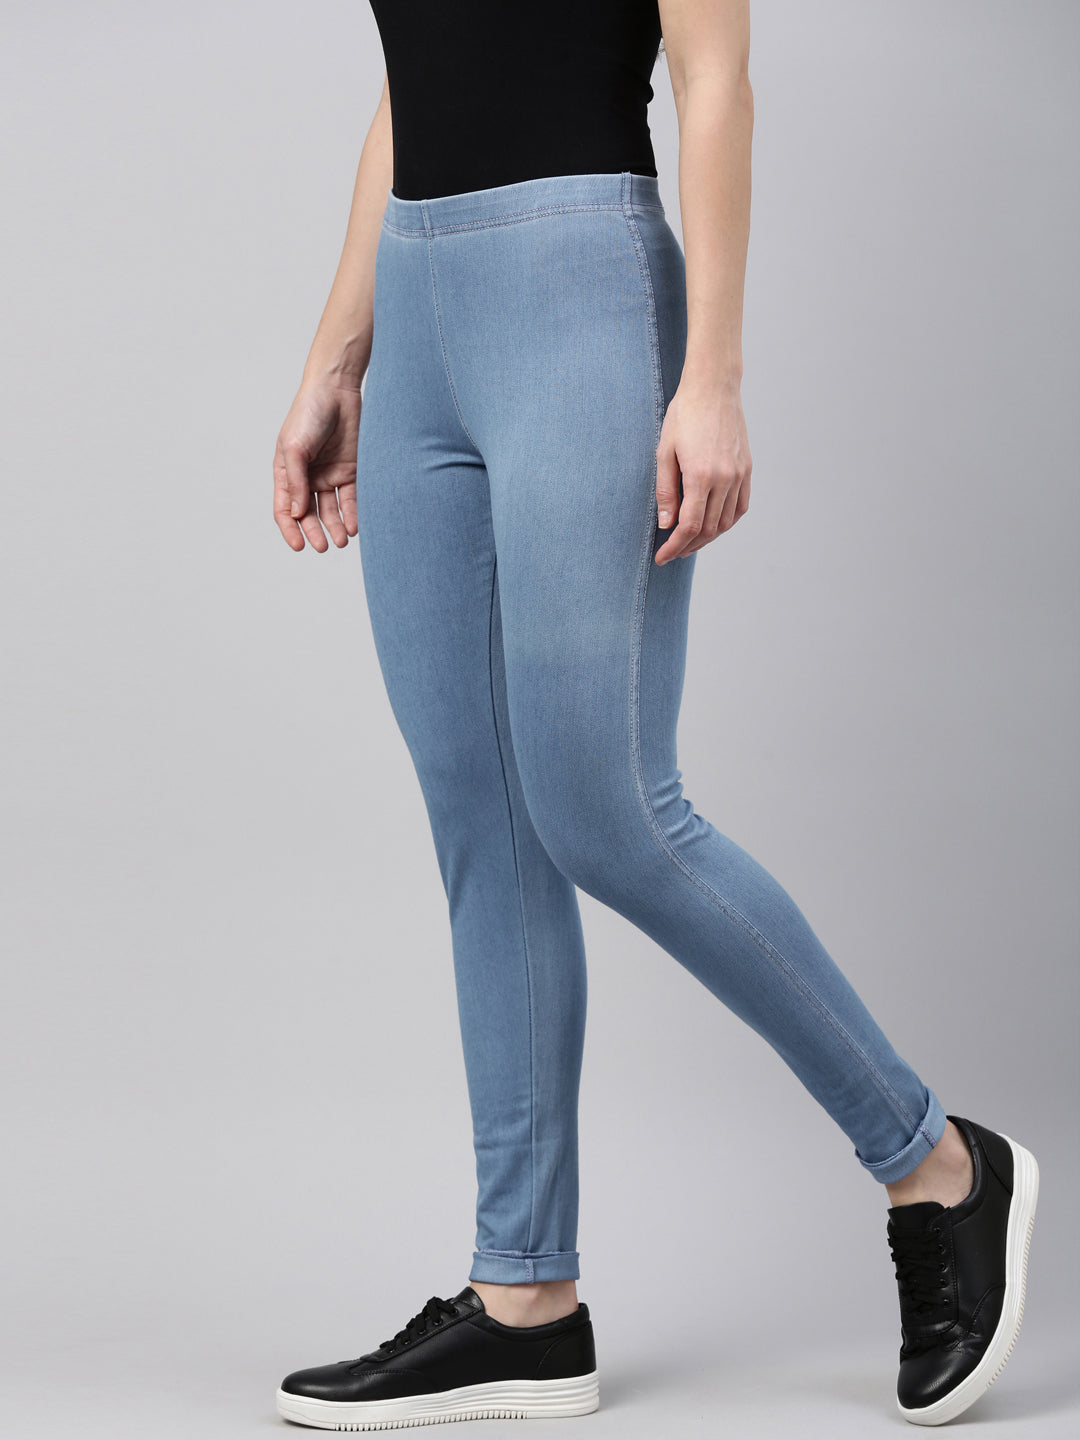 Go Colors Light Blue Denim Pencil Pants Linen Blend M Buy Go Colors  Light Blue Denim Pencil Pants Linen Blend M Online at Best Price in India   Nykaa